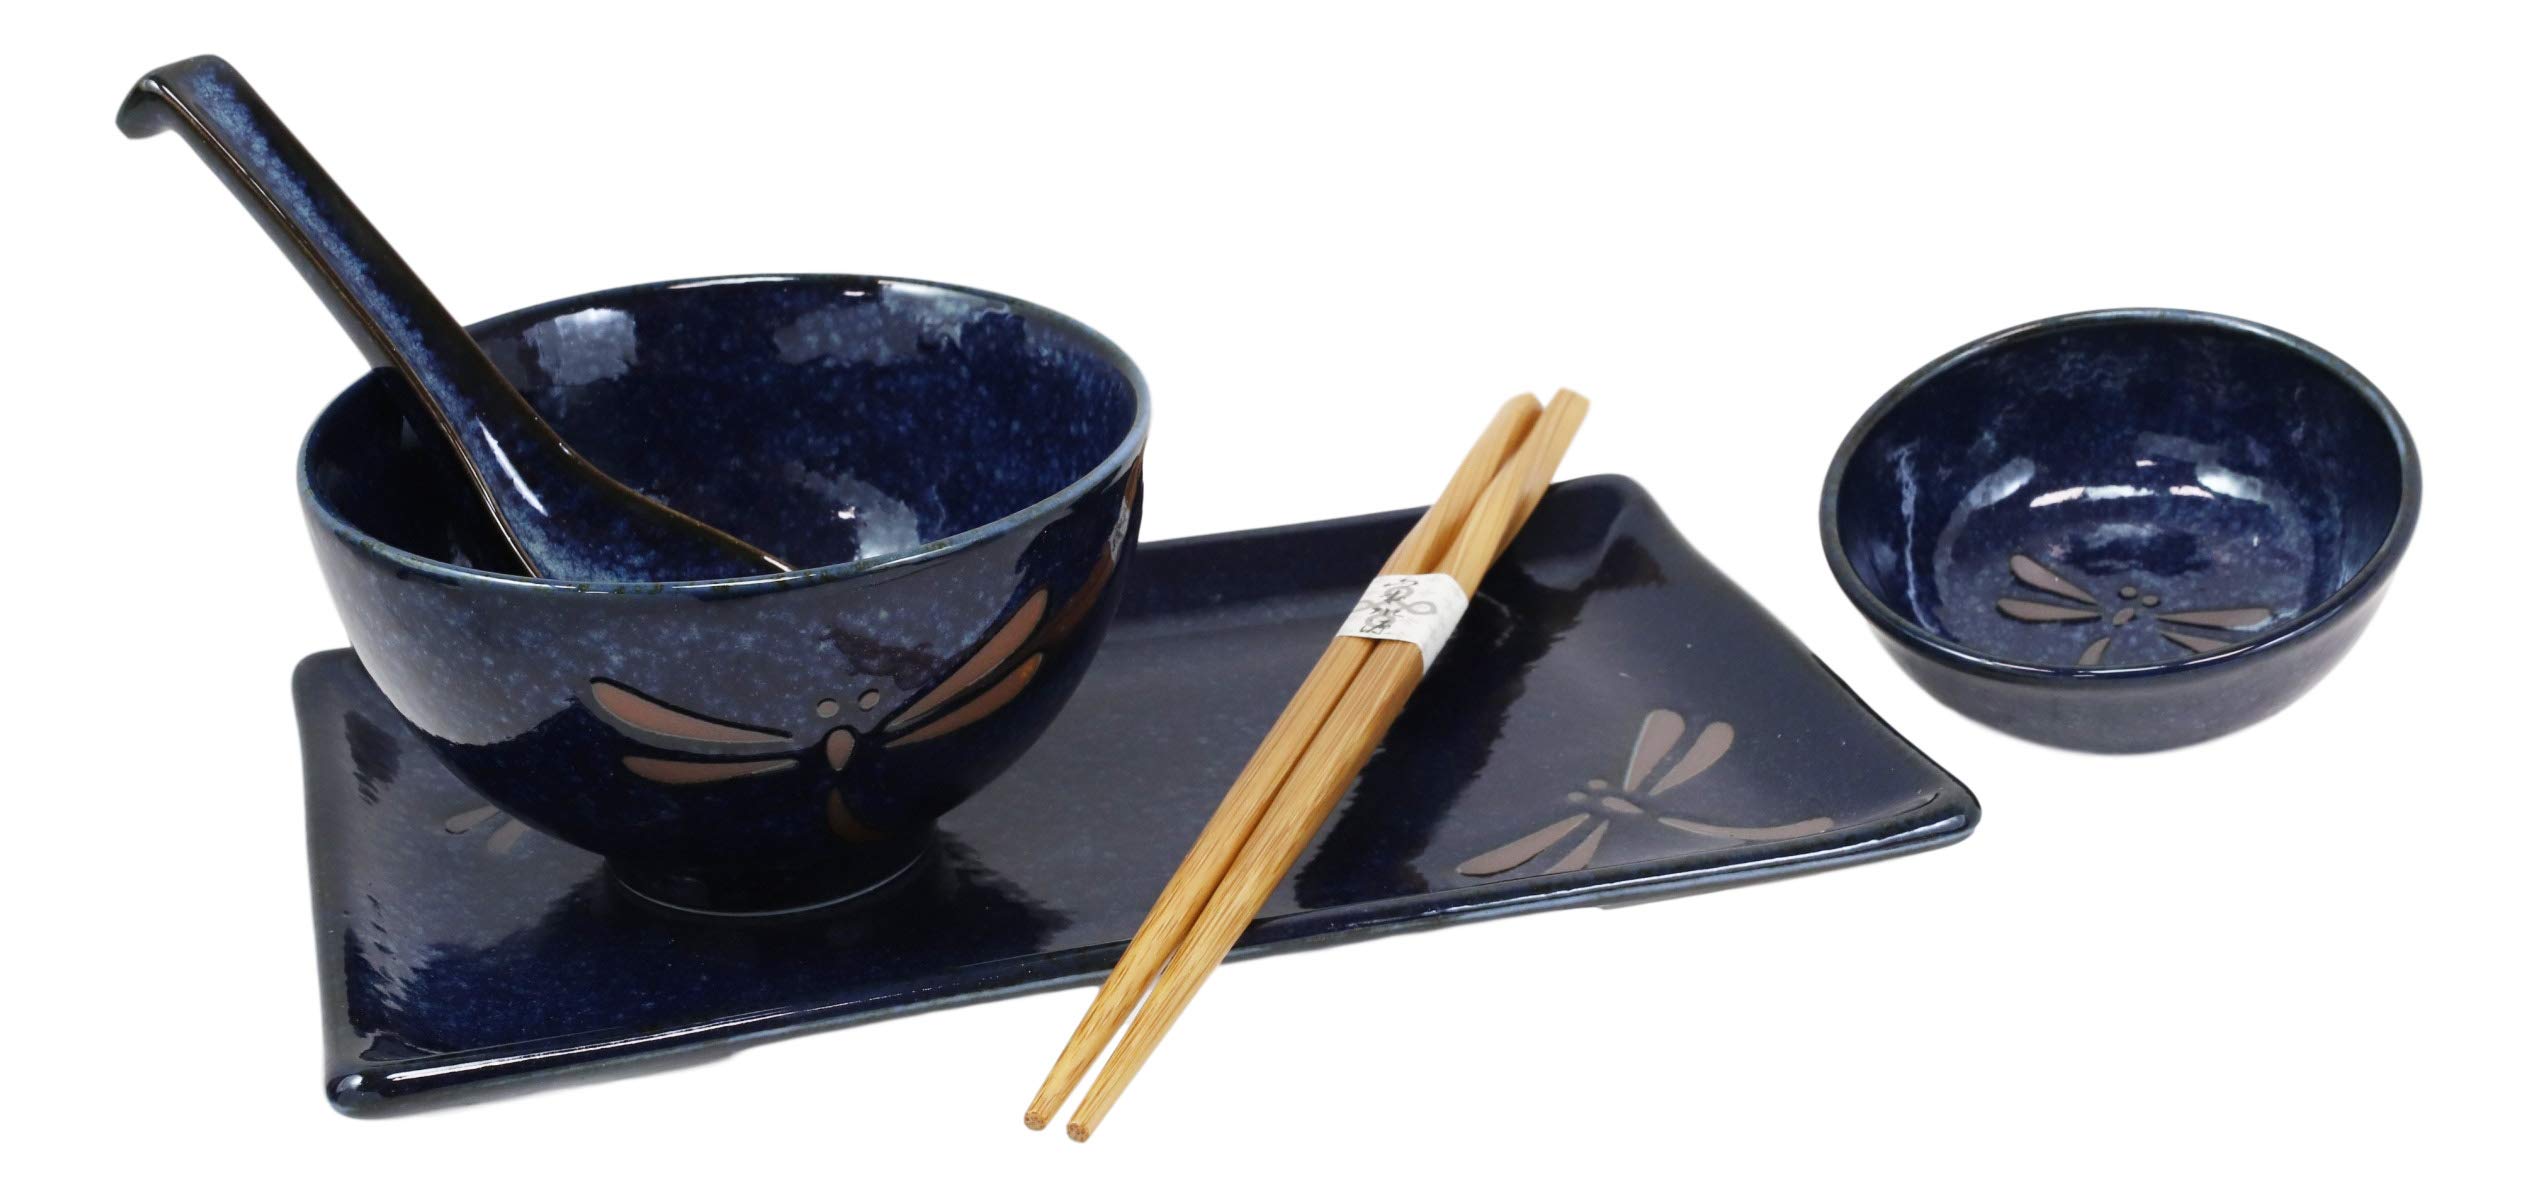 Ebros Gift Japanese Mino Ware Tombo Dragonfly Blue Porcelain Sushi Dinnerware 10pc Set For 2 People Pairs of Sushi Plates Soup And Sauce Bowls Bamboo Chopsticks Asian Soup Spoons Housewarming Gift